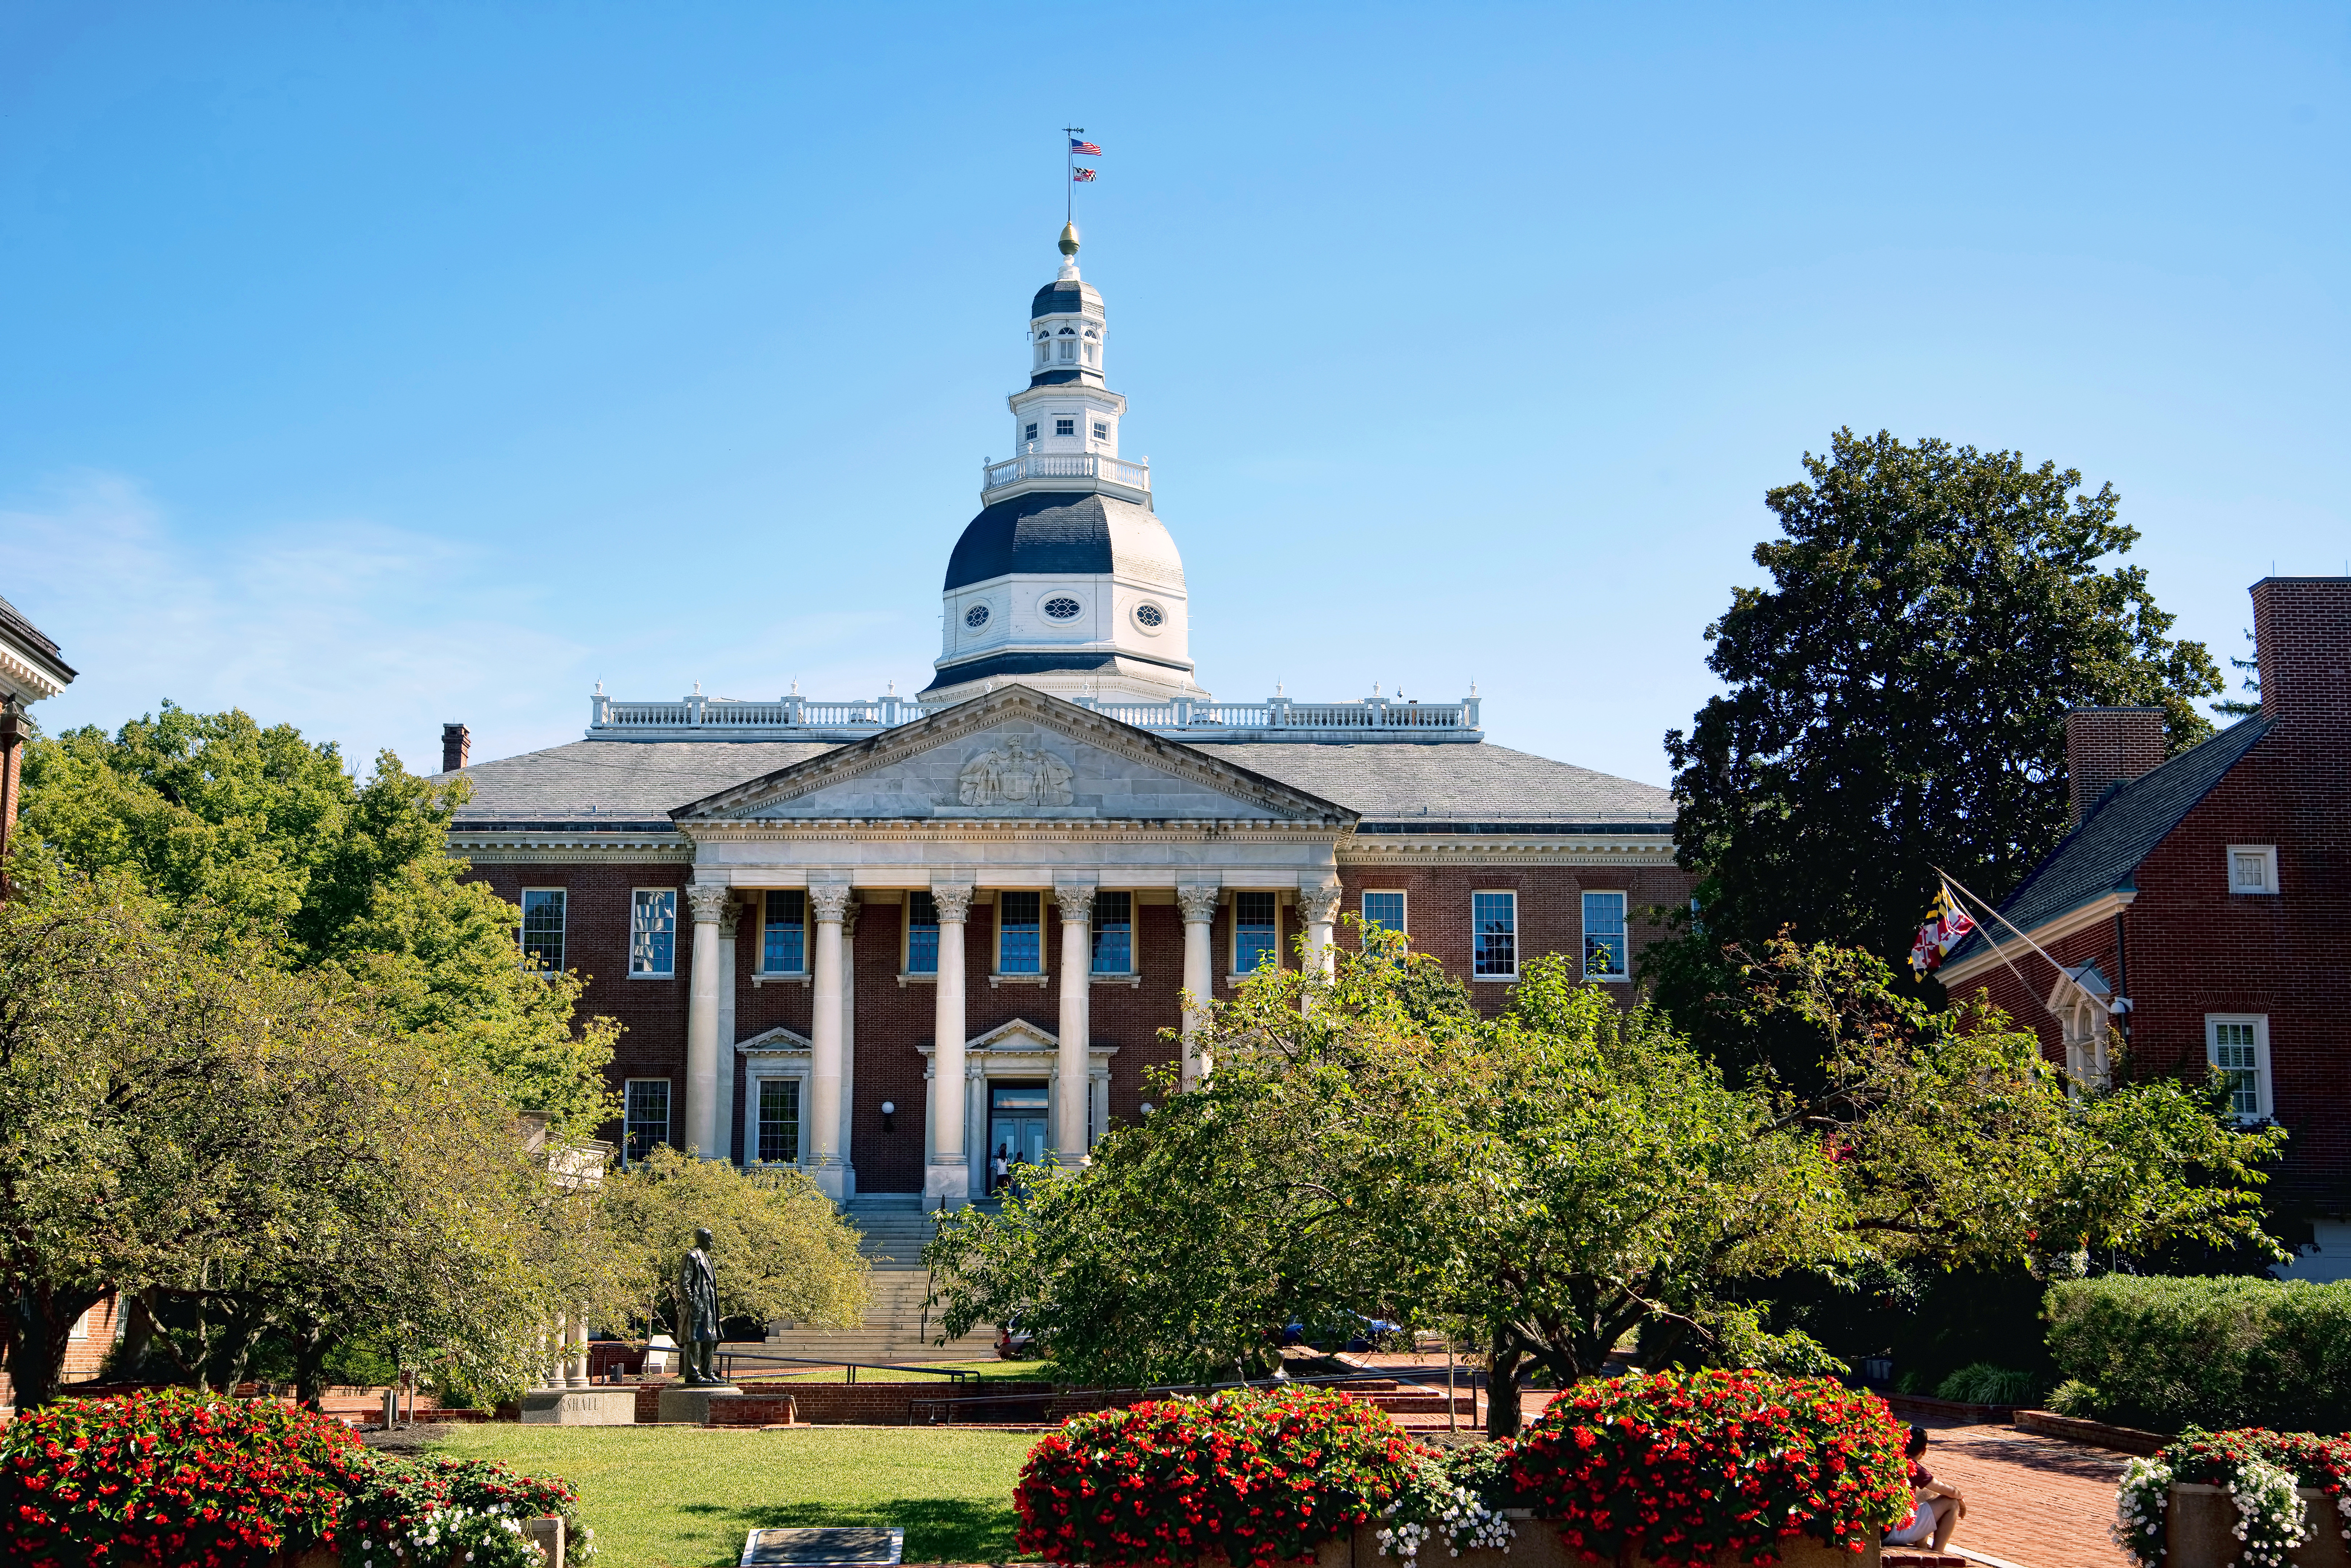 Maryland State House in Annapolis, Maryland